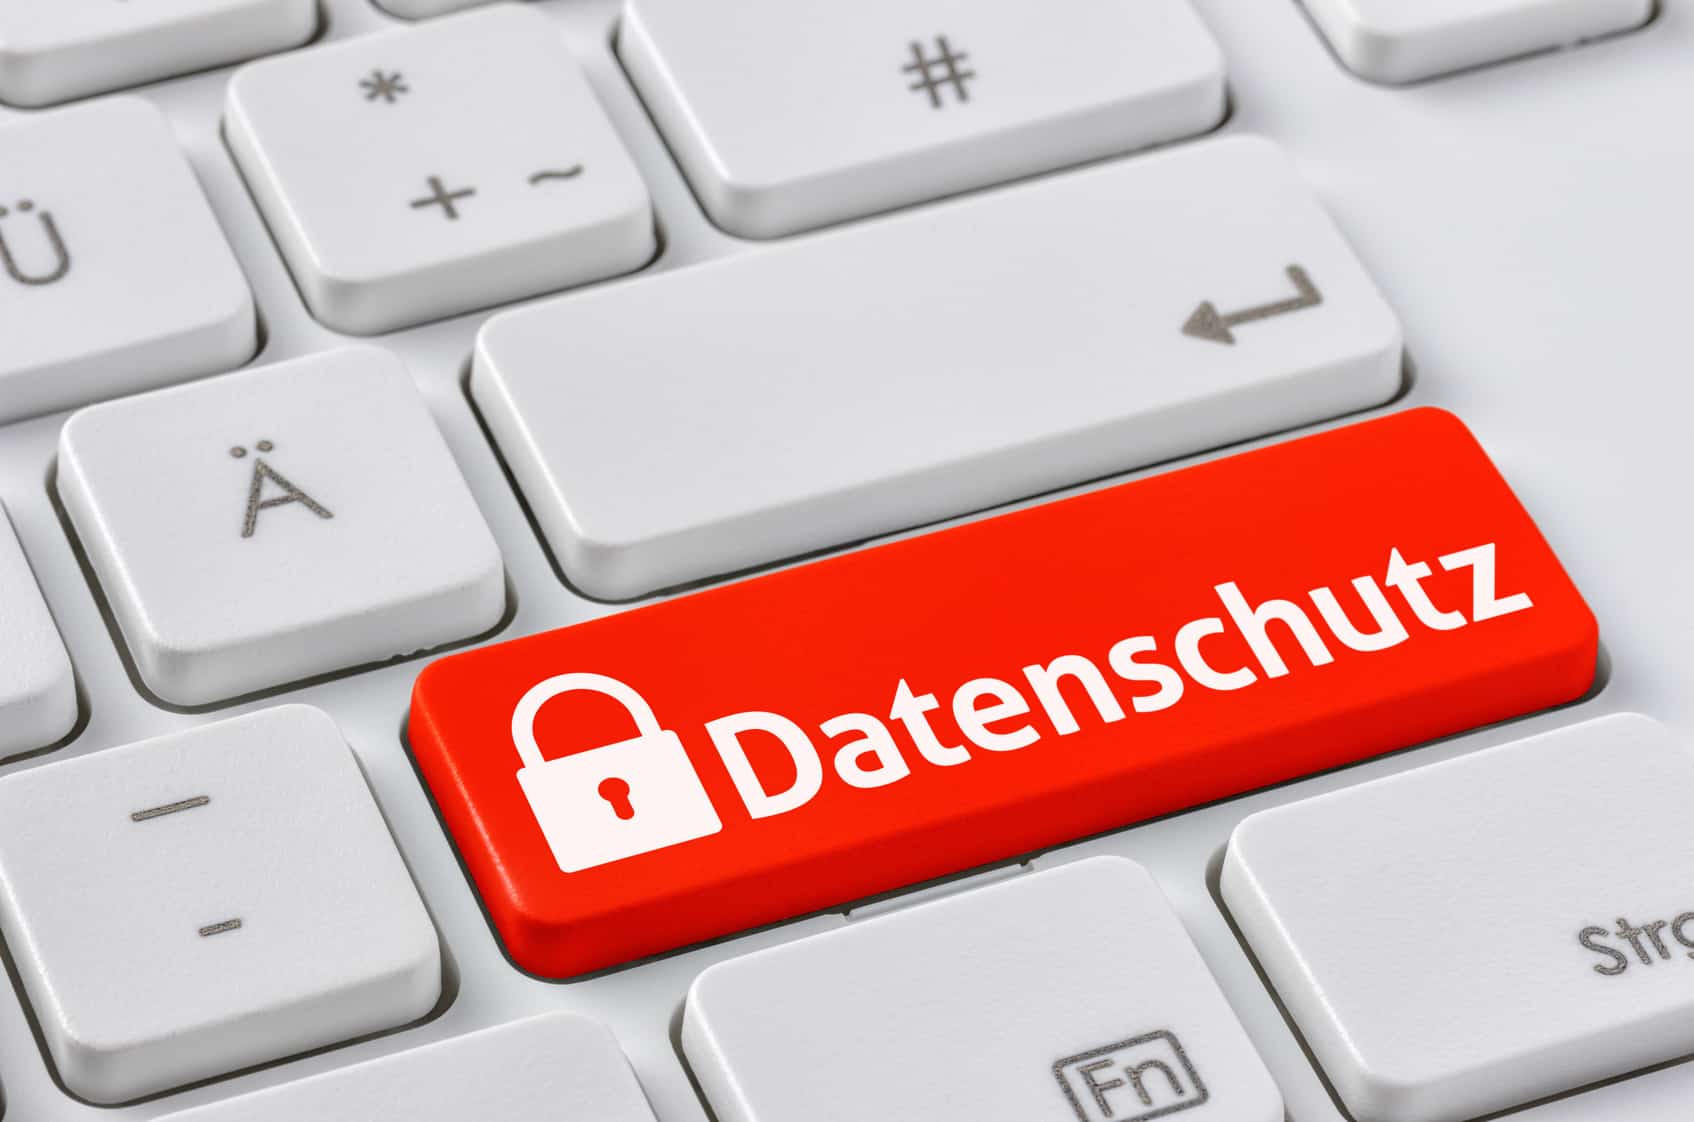 A keyboard with a bright red key and the inscription "Datenschutz" (data protection)